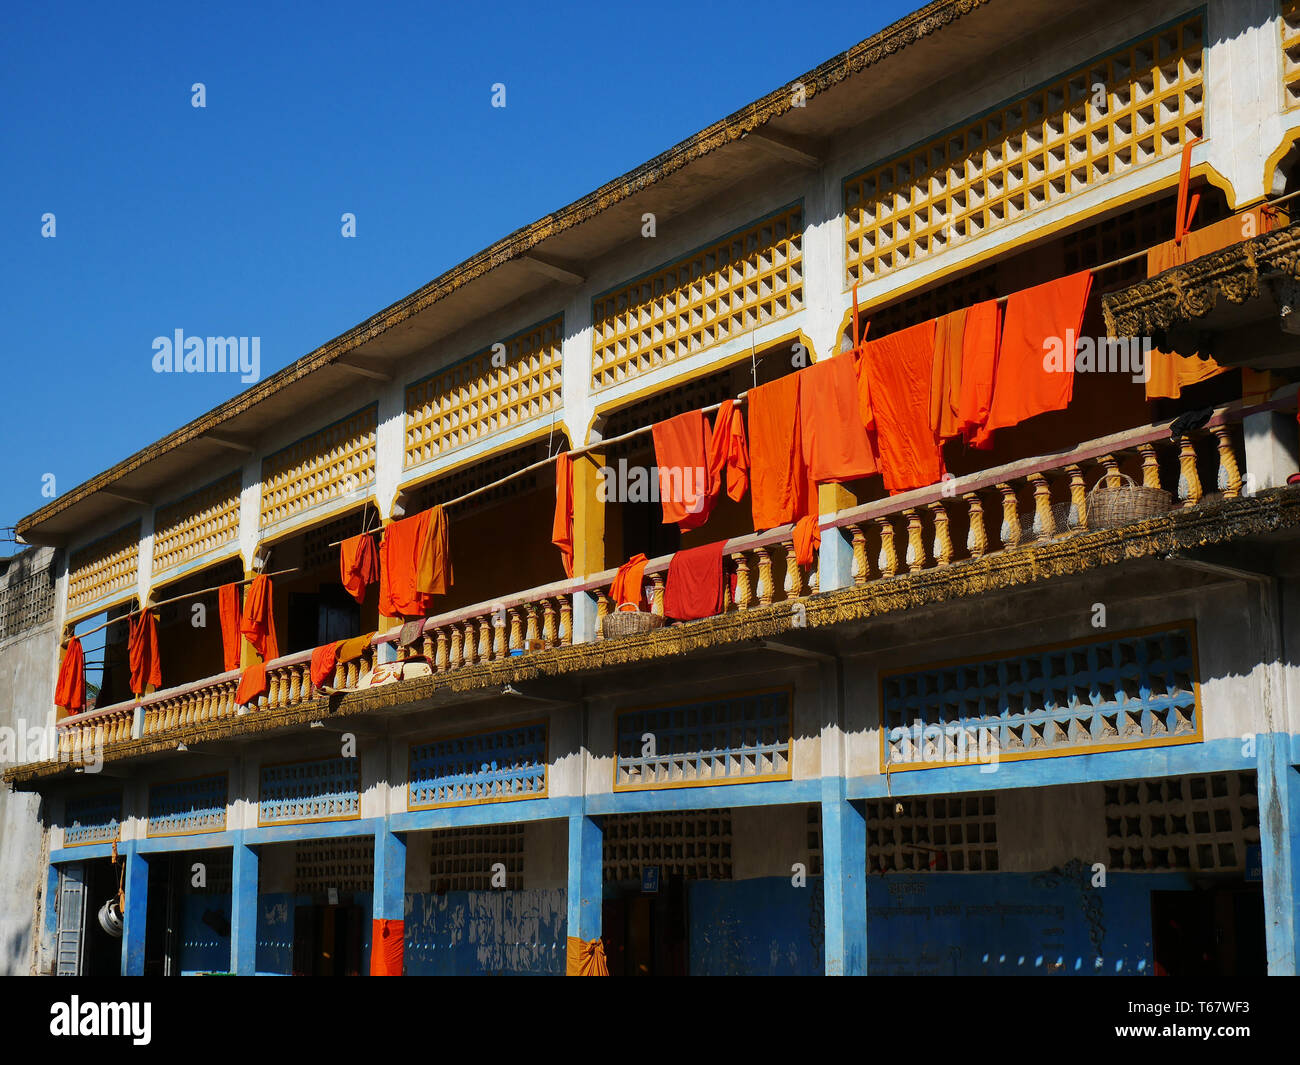 Saffron coloured Buddhist robes hanging inside the old walled temple of Entri Sam Voreak Pagoda. Kampong Thom, Cambodia. 19-12-2018 Stock Photo